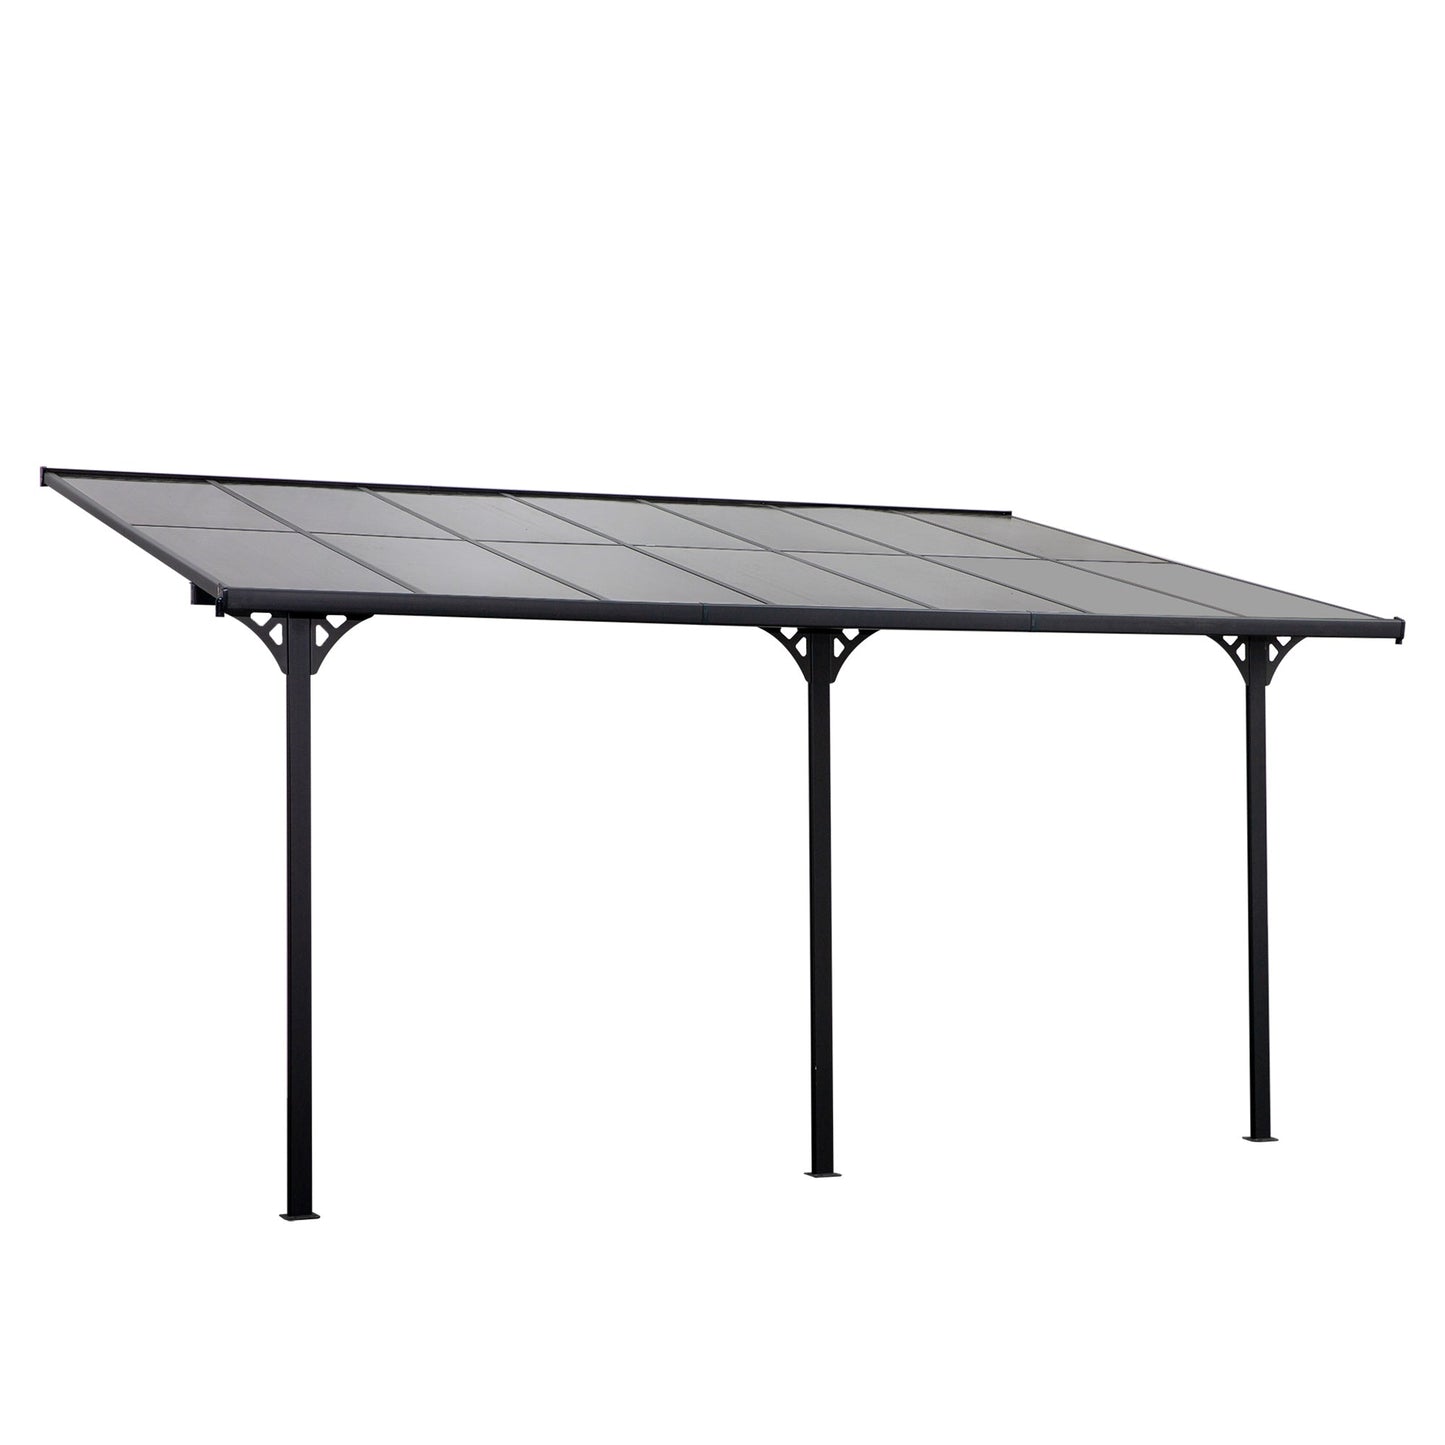 -Outsunny 14.5' x 10' Outdoor Pergola Patio Gazebo Awning for Patio with Adjustable Posts & Height, UV-Fighting Panels, & Aluminum Frame - Outdoor Style Company